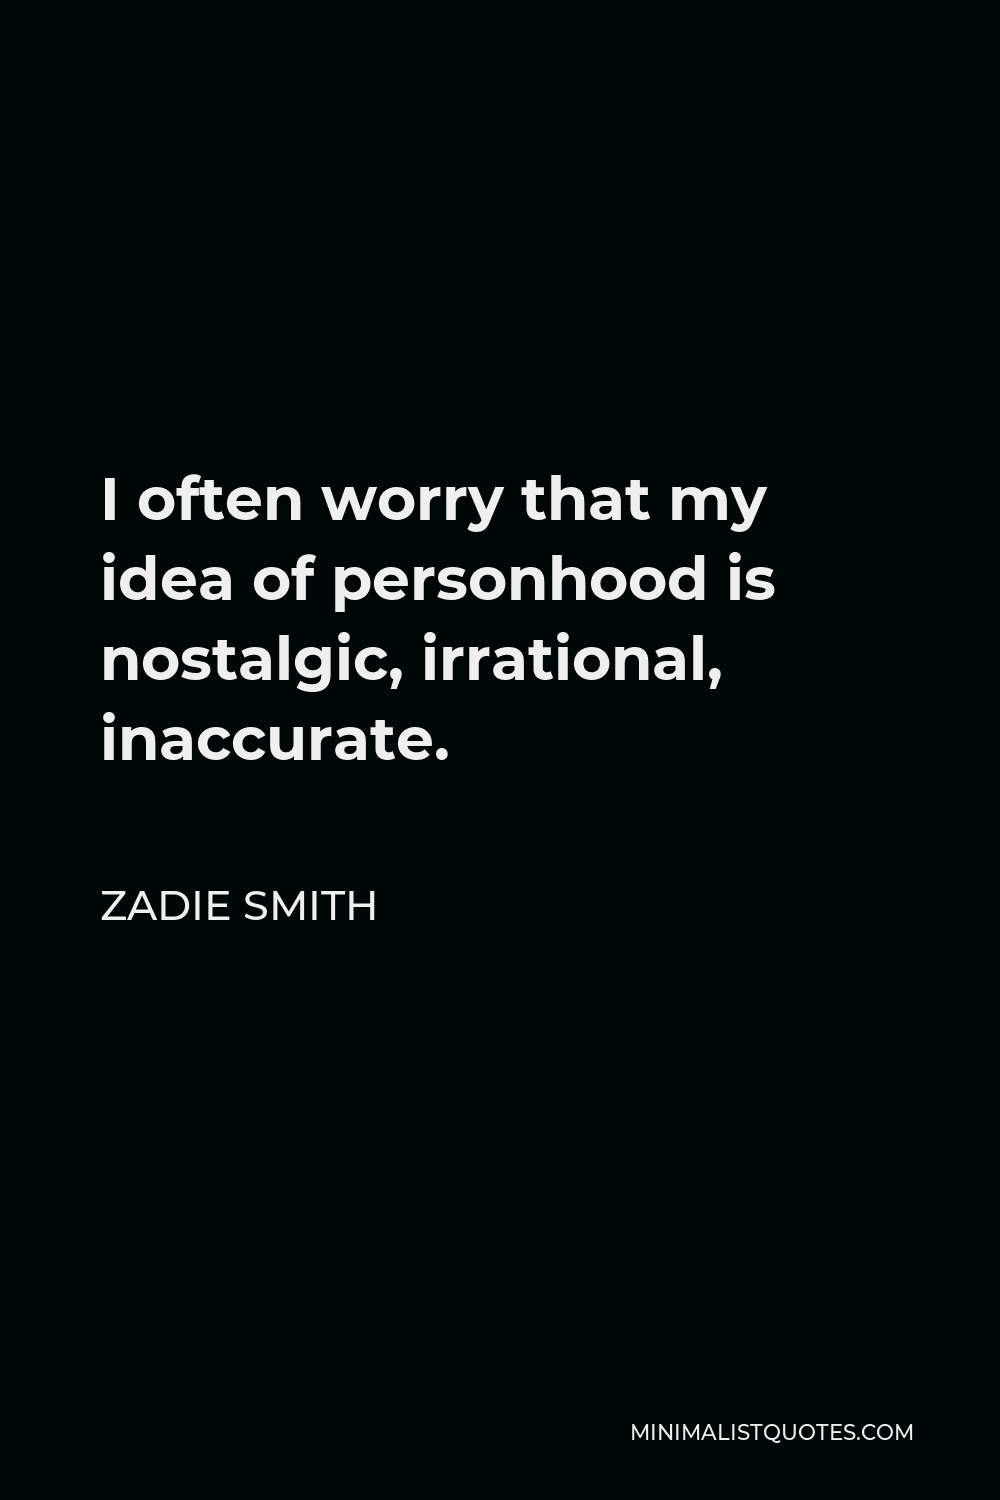 Zadie Smith Quote - I often worry that my idea of personhood is nostalgic, irrational, inaccurate.